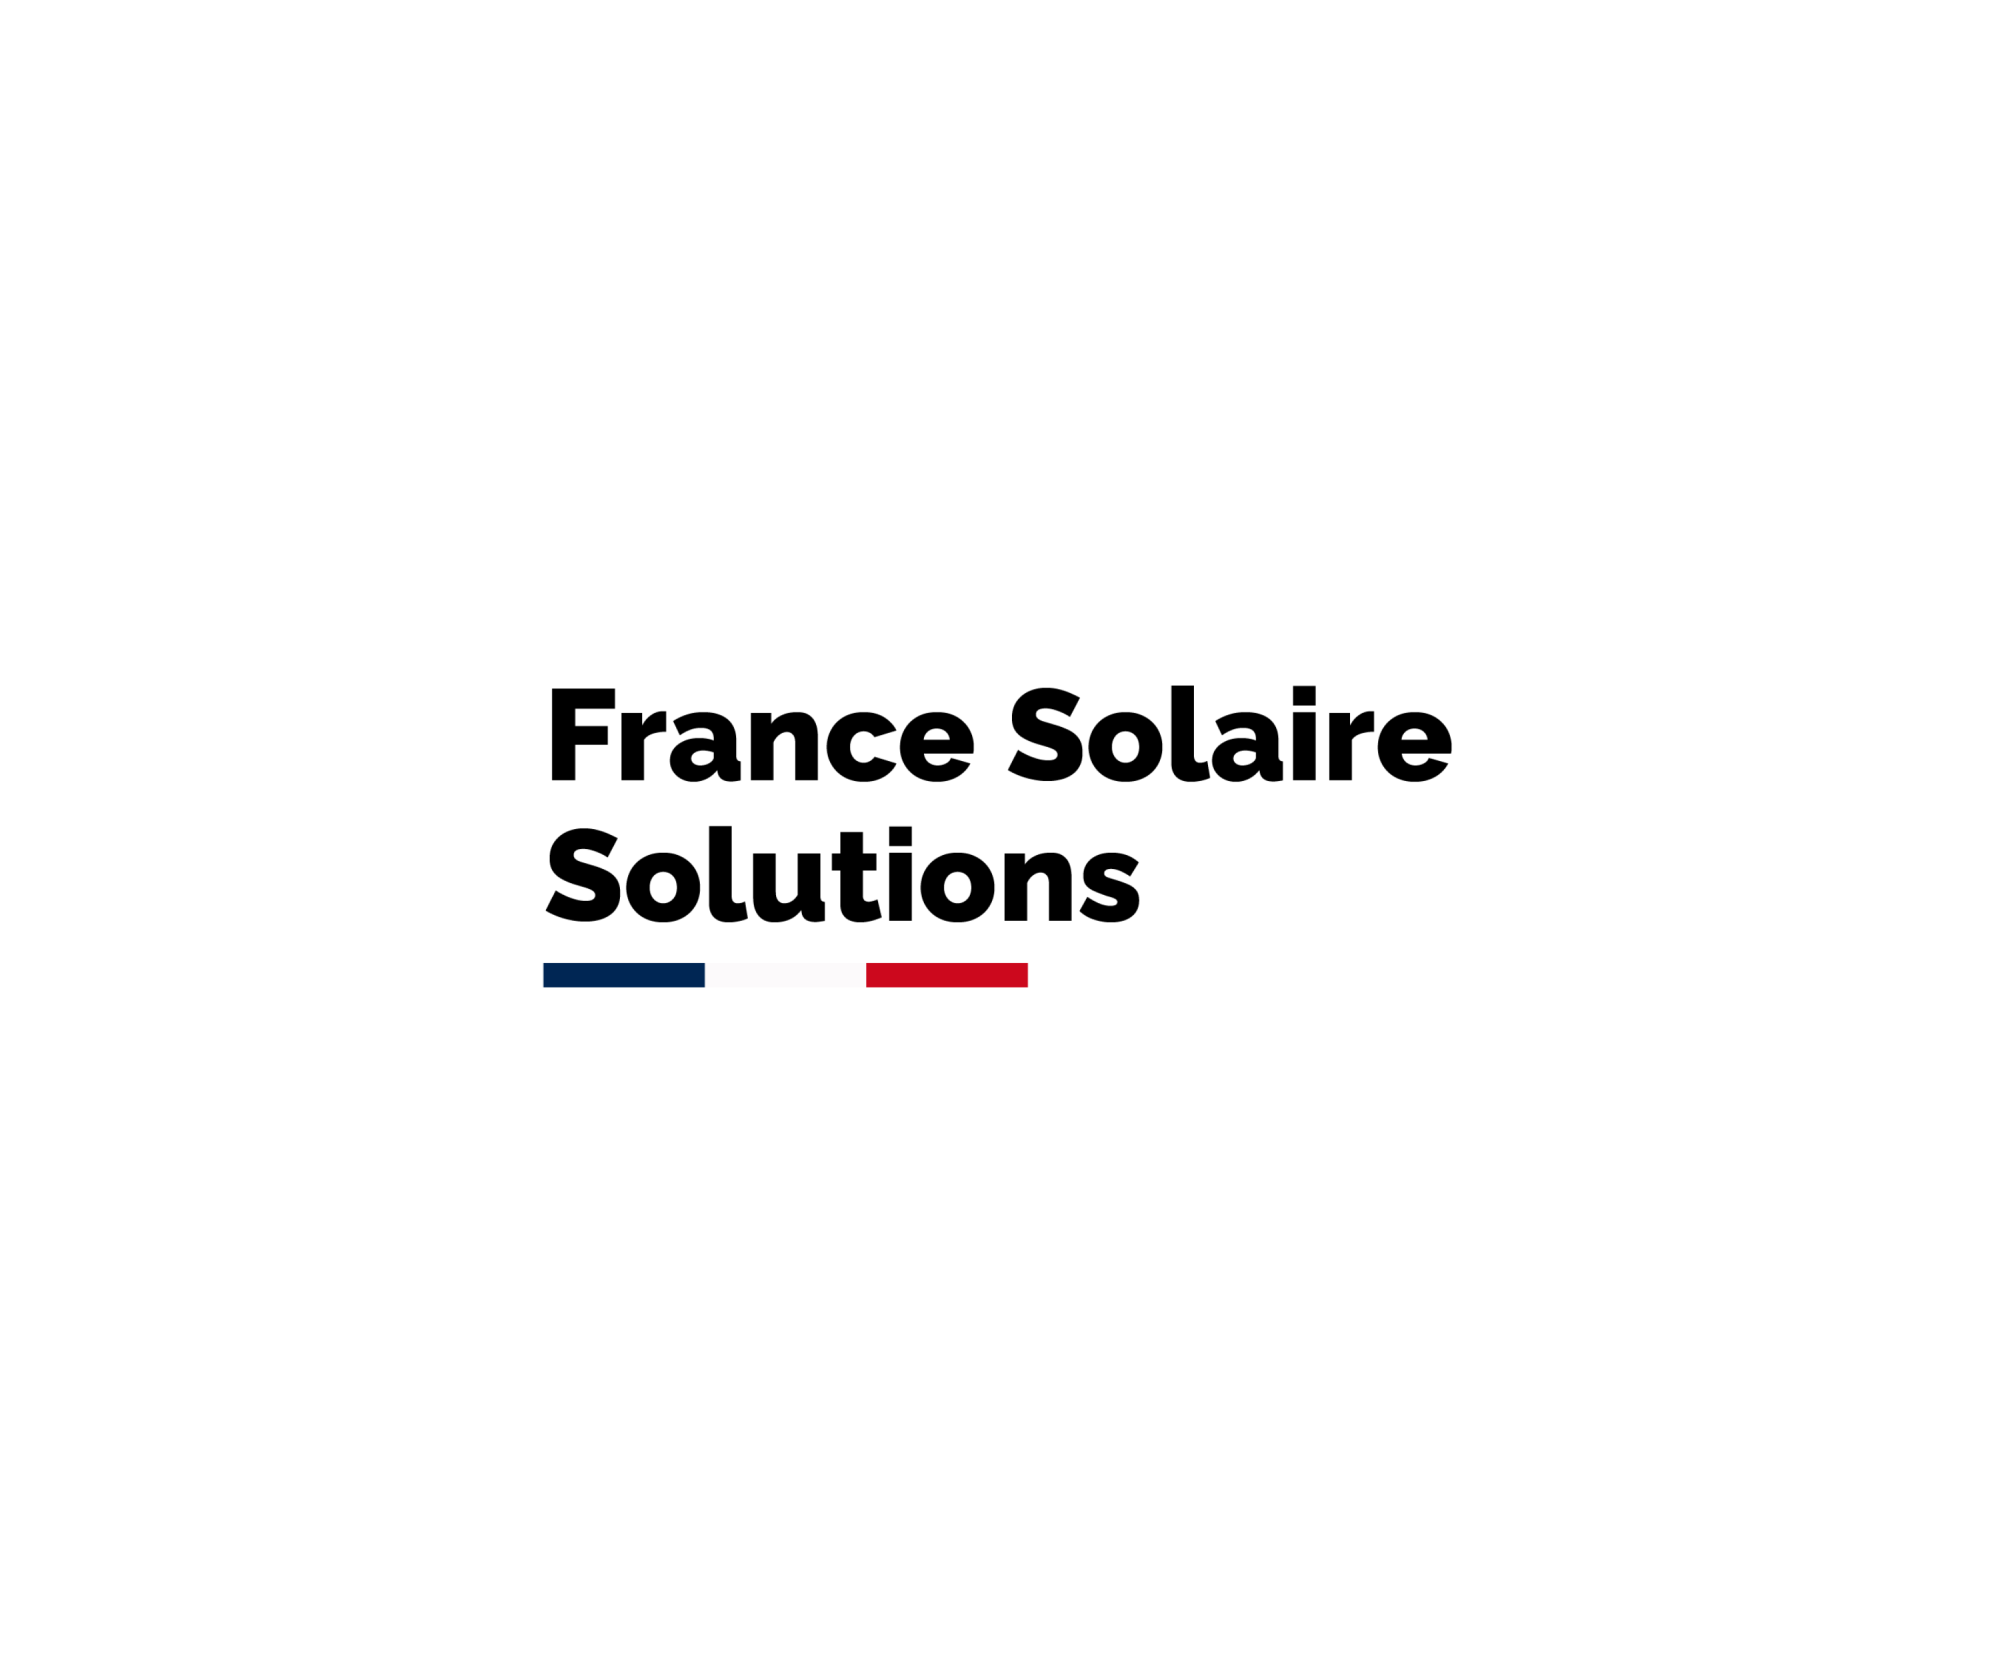 France Solaire Solutions